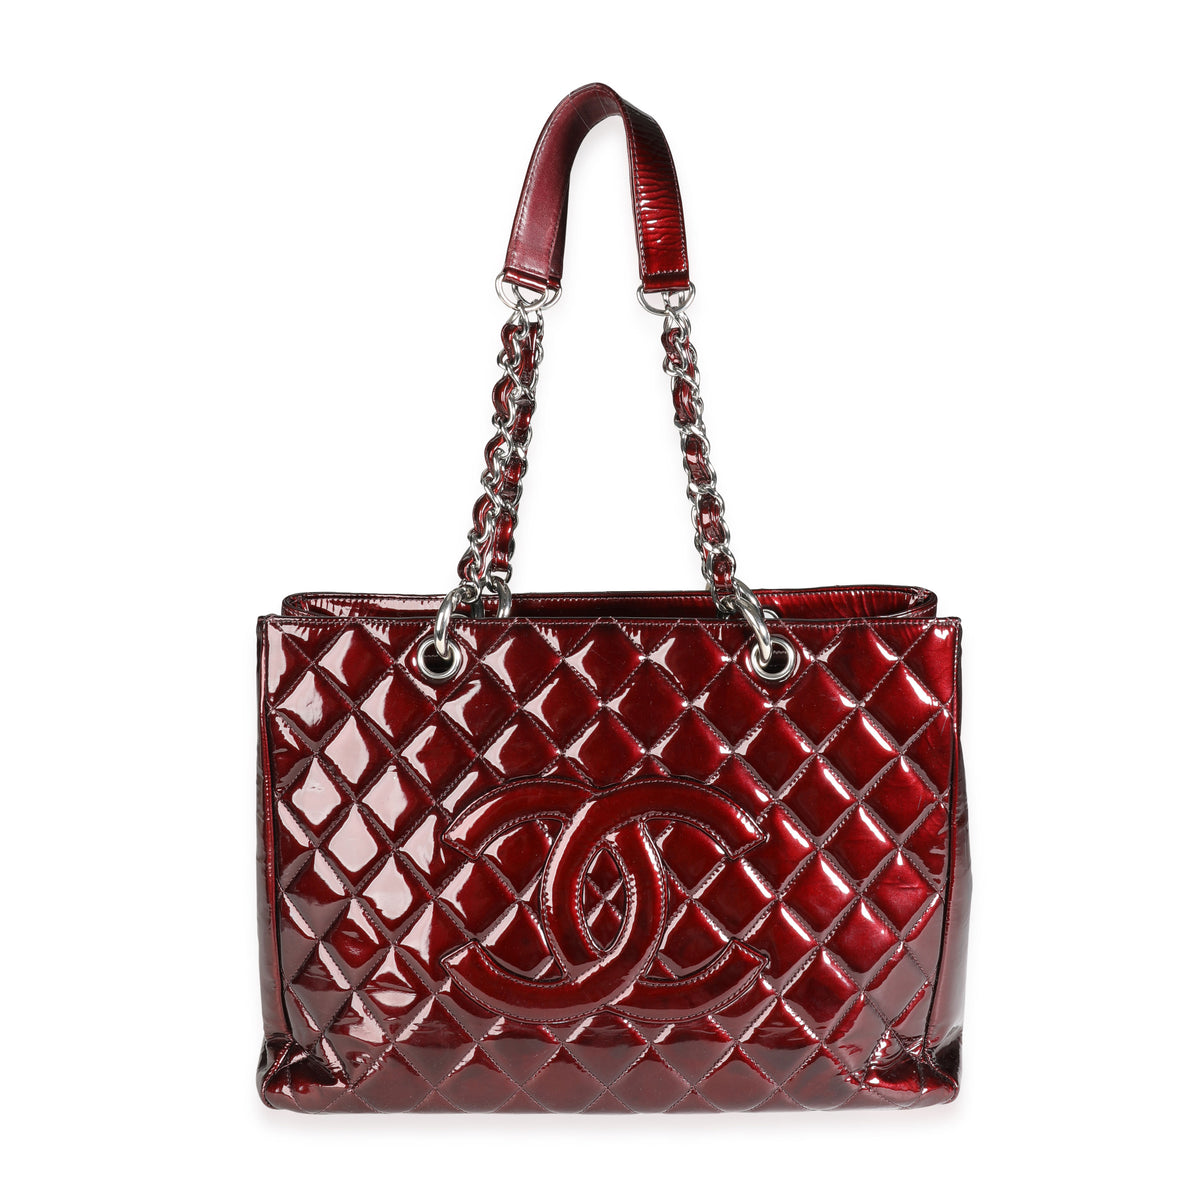 Chanel Burgundy Quilted Patent Leather Grand Shopping Tote